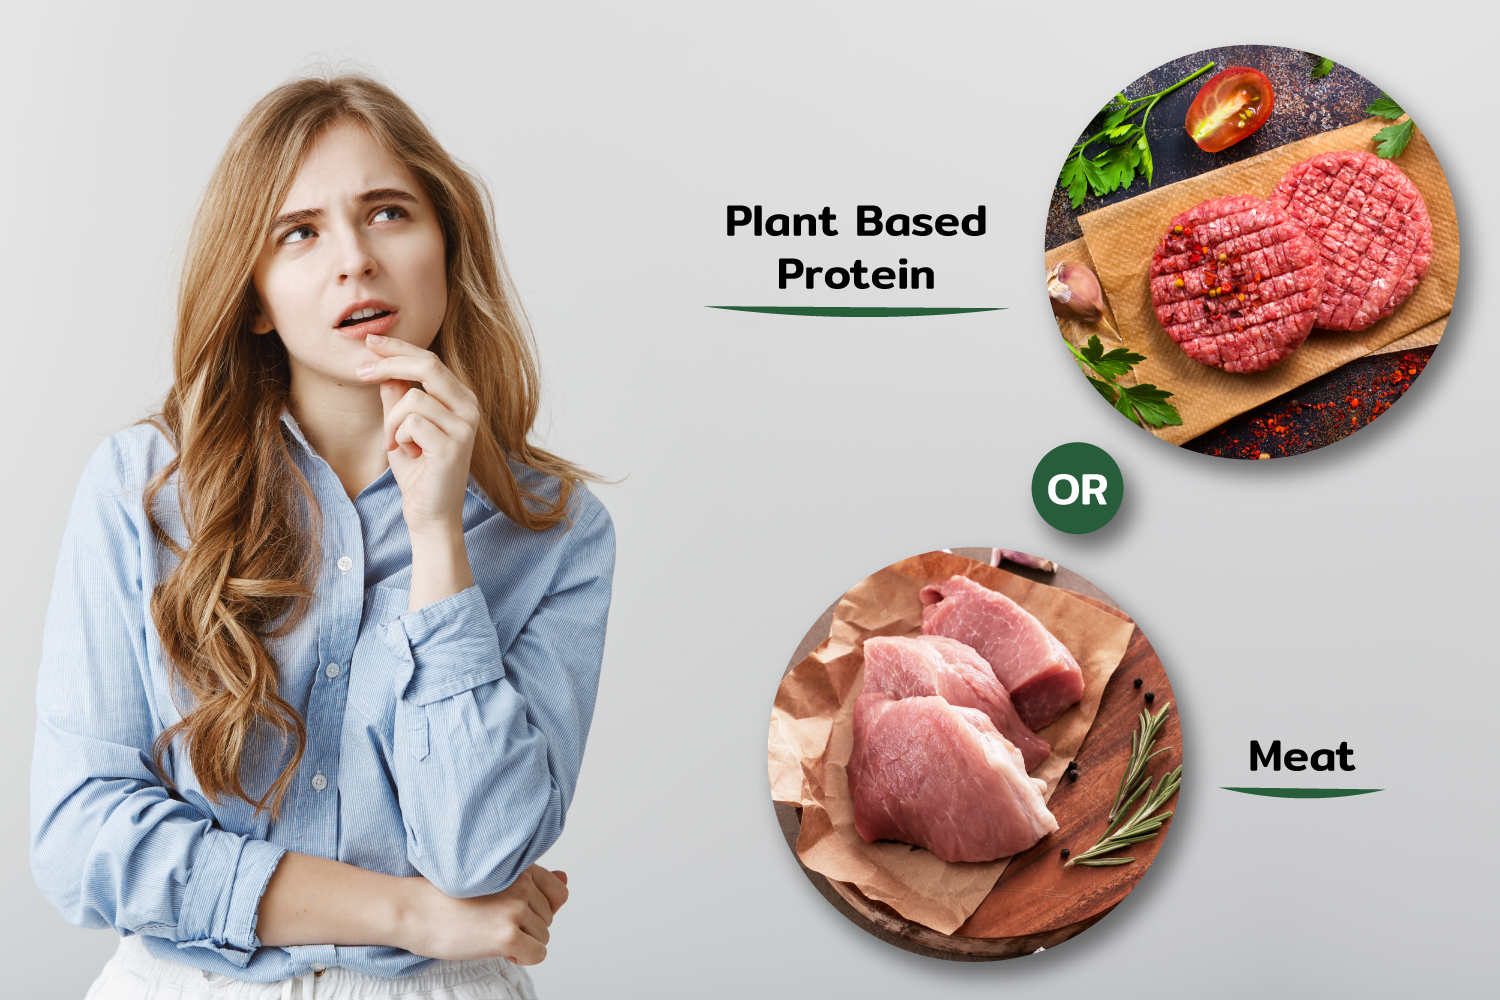 Why should you eat plant protein instead of meat?